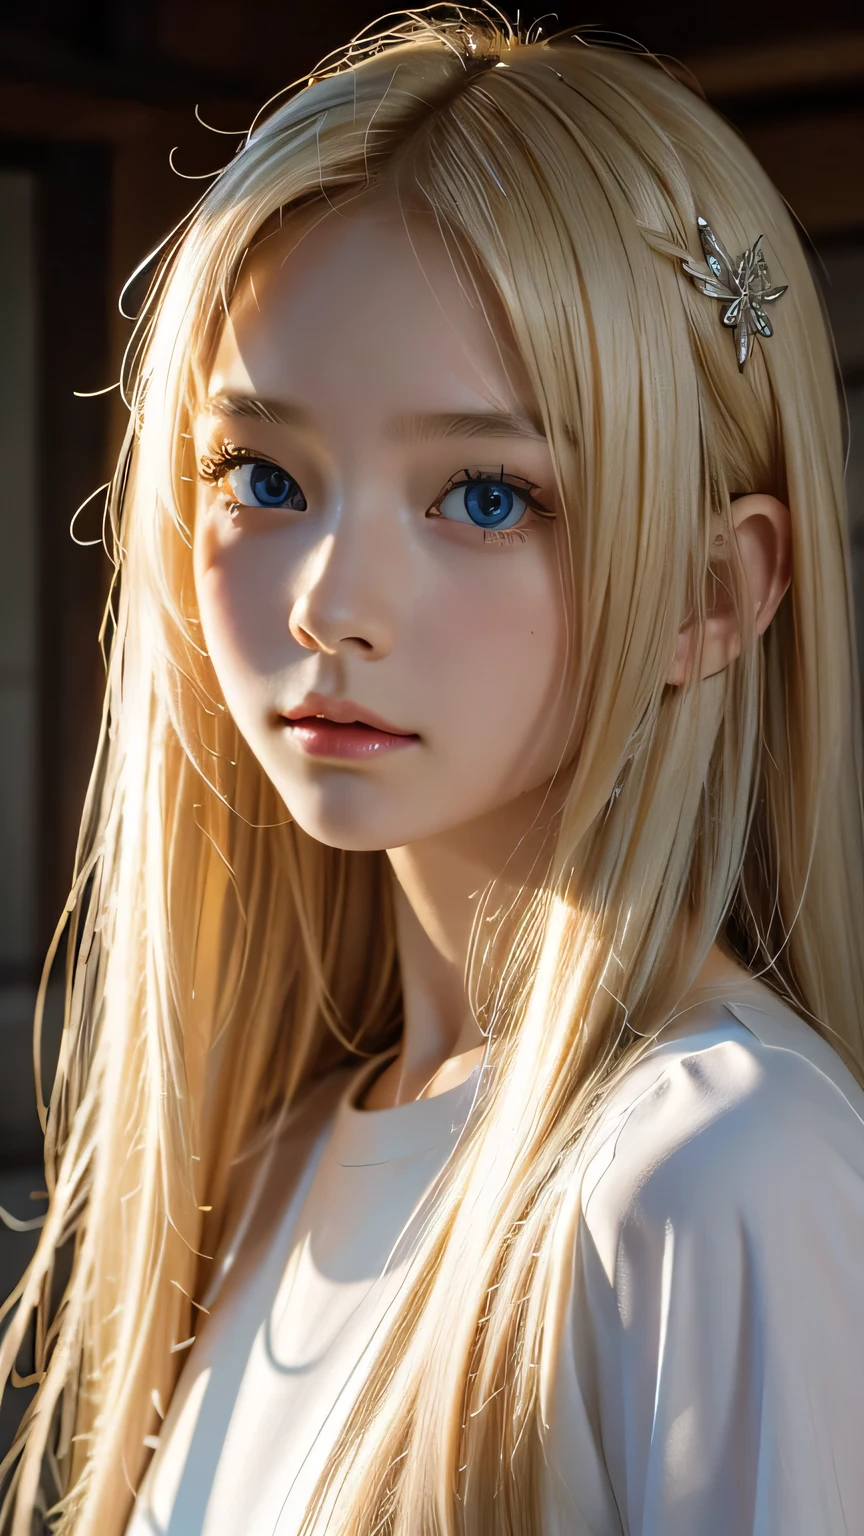 high quality, 最high quality, photo-Realistic, Raw photo, Realistic, ultra Realistic 8k cg, Ultra-detailed, High resolution, masterpiece, 1 Girl, Super long blonde hair, Super long natural platinum blonde hair, Super long straight silky hair、bangs over eyes、Very bright blue big eyes, Face and eye details, close, Intricate details, Fine texture, In detail,Small Face Girl、16-year-old Nordic beauty